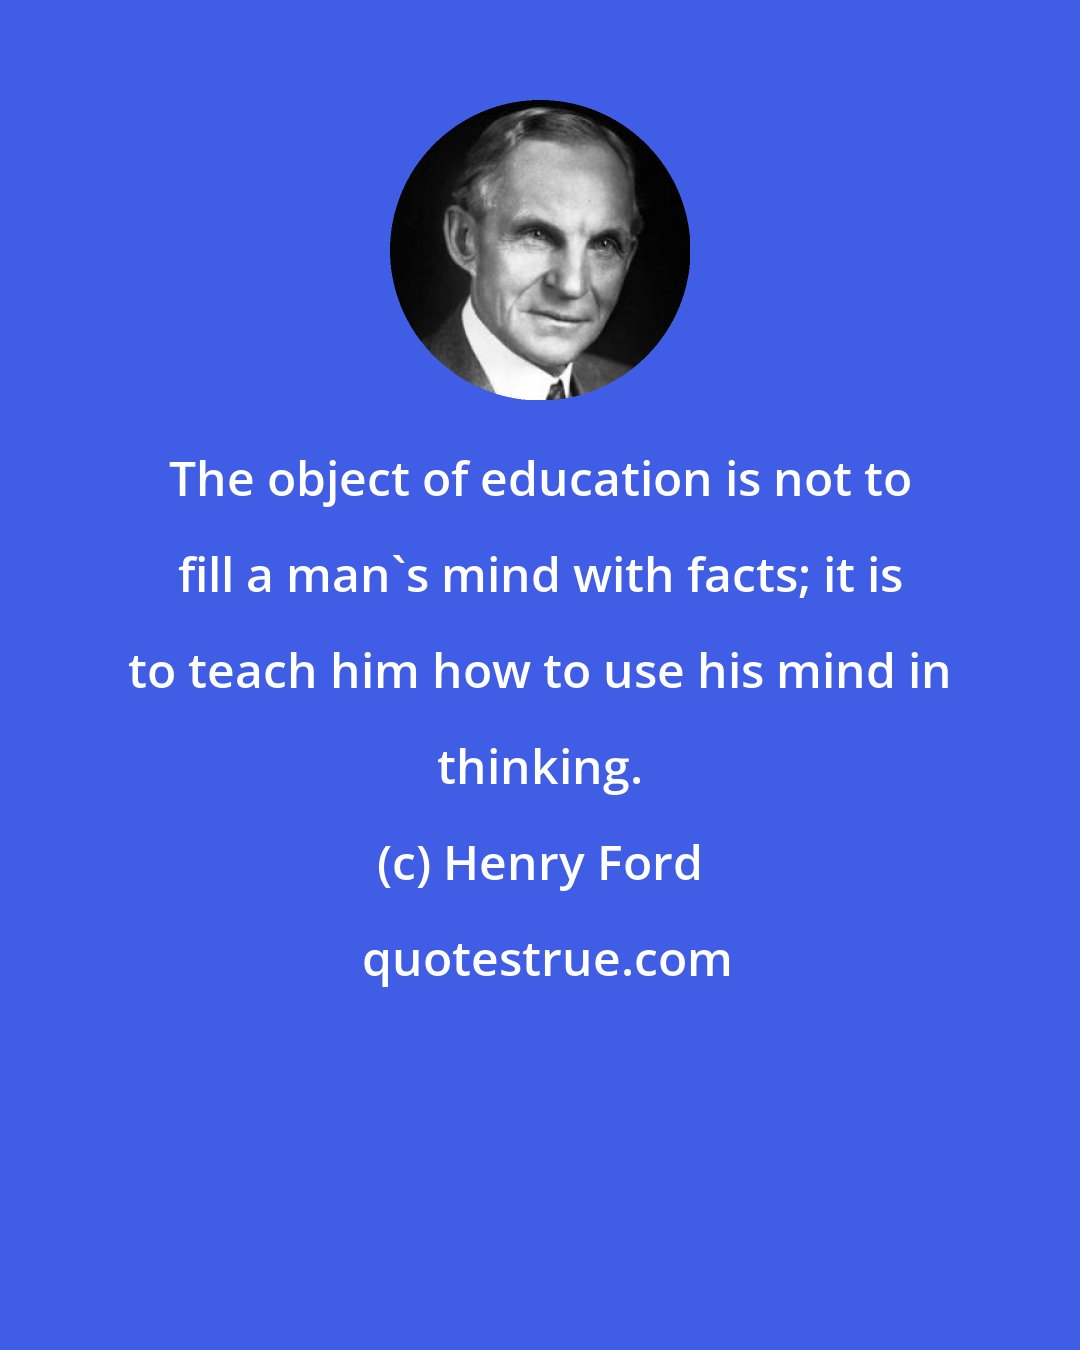 Henry Ford: The object of education is not to fill a man's mind with facts; it is to teach him how to use his mind in thinking.